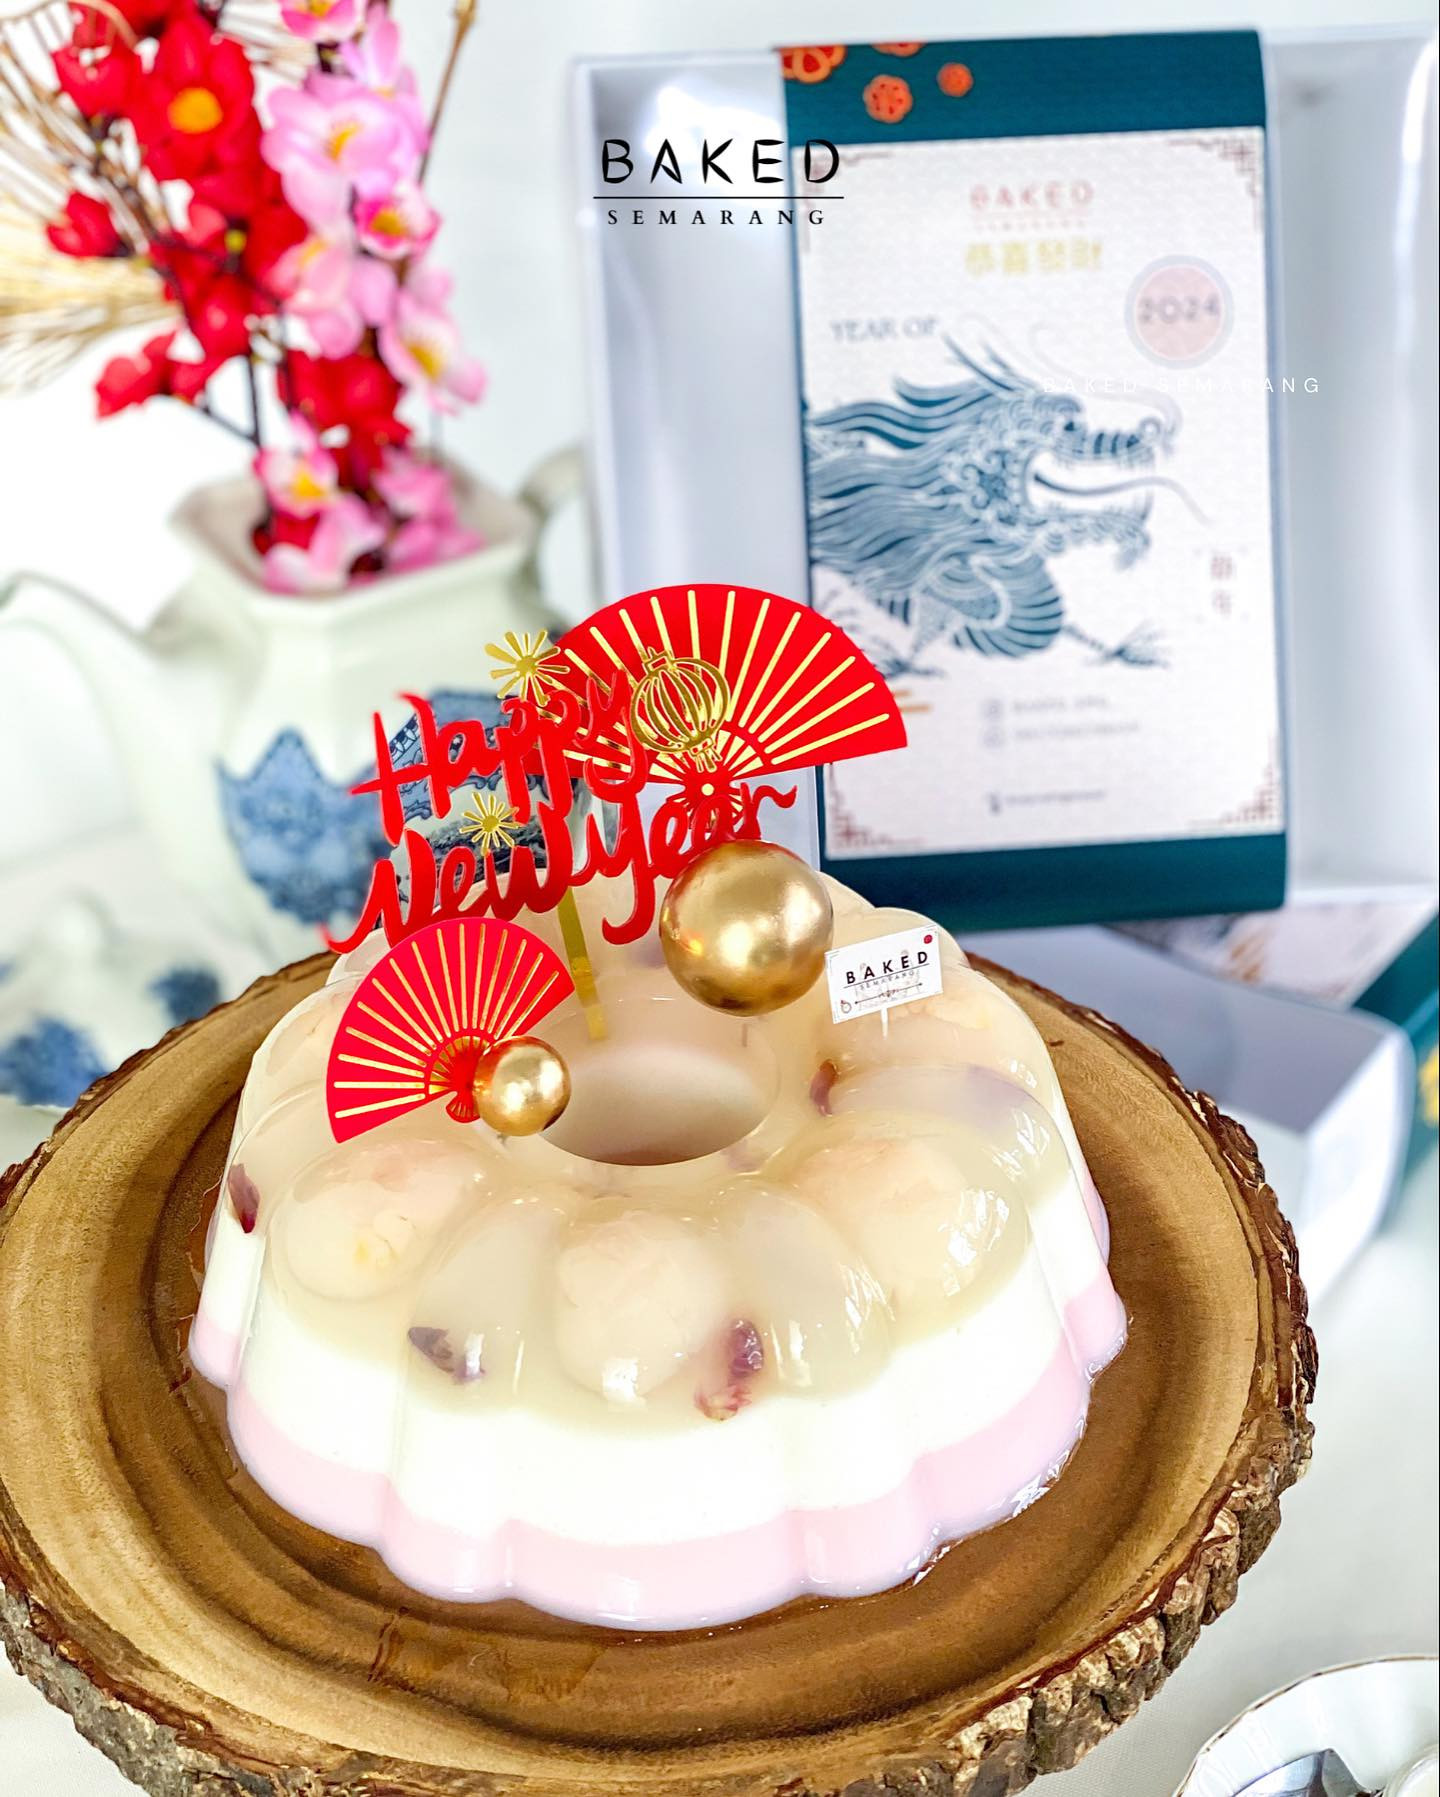 LYCHEE ROSE PUDDING